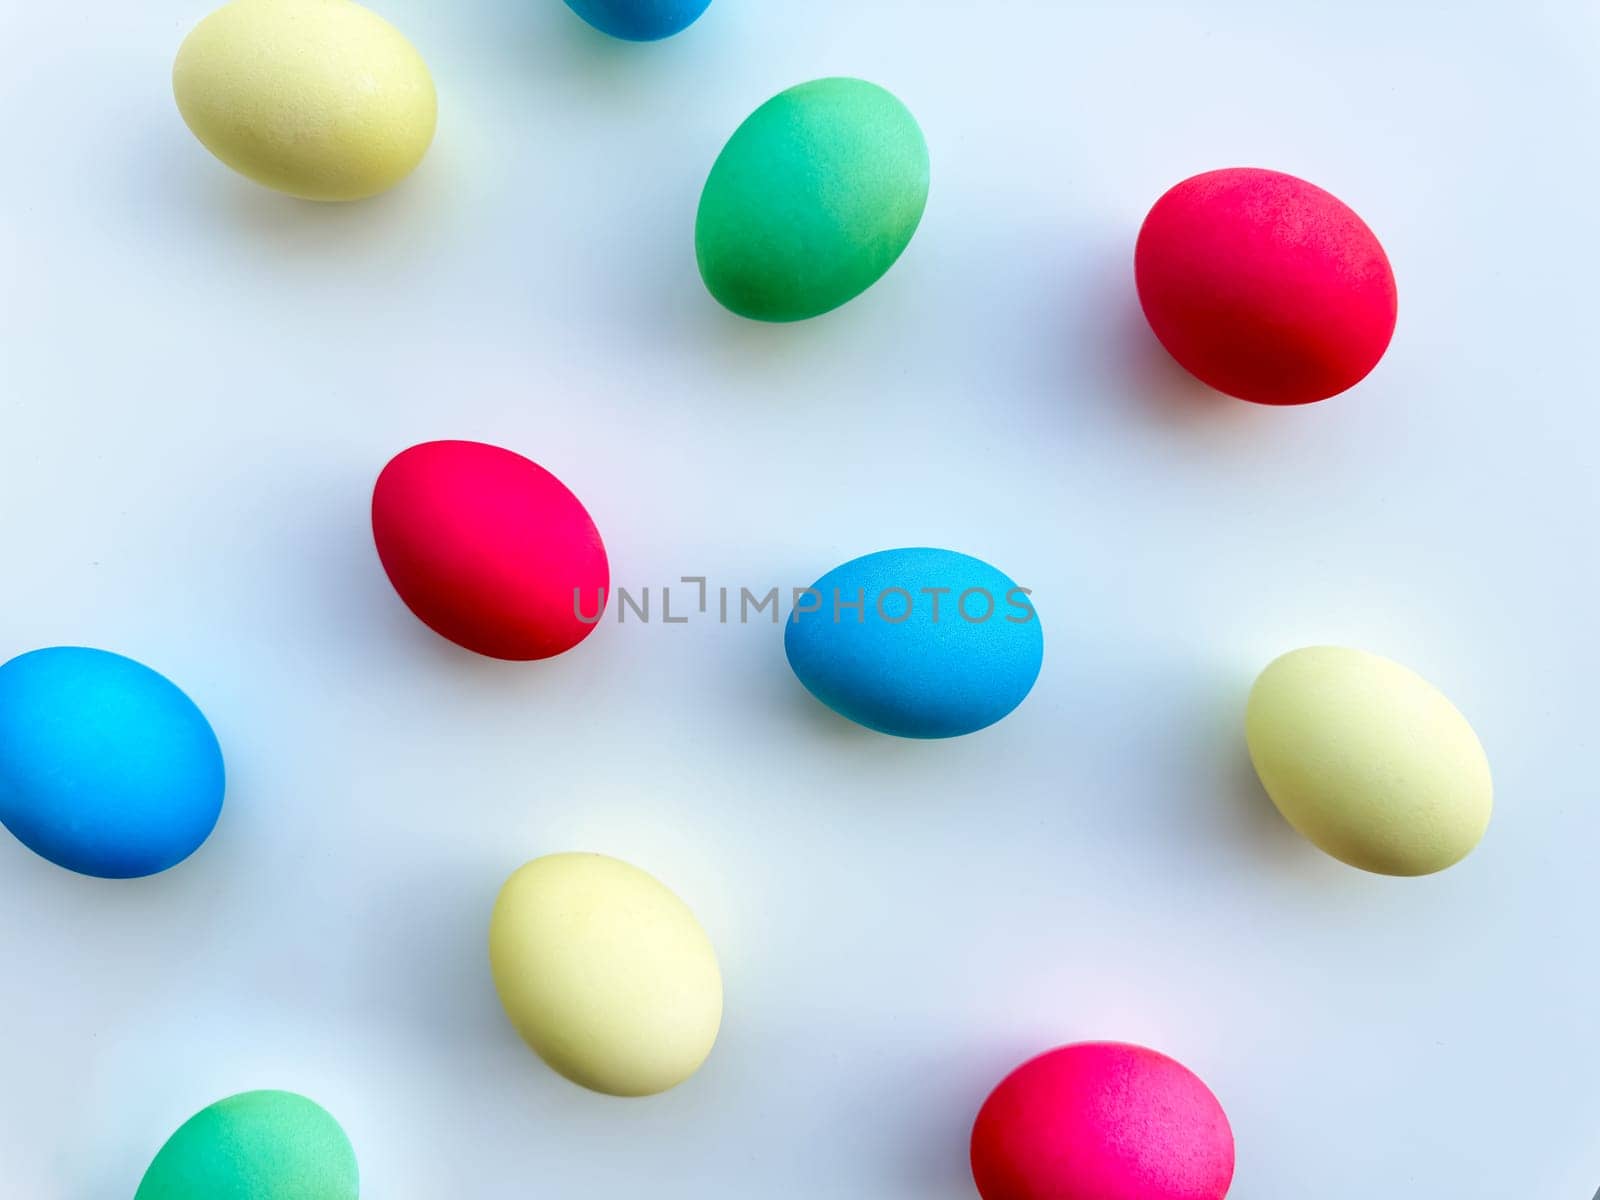 Colorful Easter eggs scattered on white background, flat lay composition for spring holiday celebration and decoration ideas. For Easter holiday promotions, themed party invitations, seasonal blog posts, educational materials about Easter, background imagery for websites and social media platforms celebrating the spring season. High quality photo